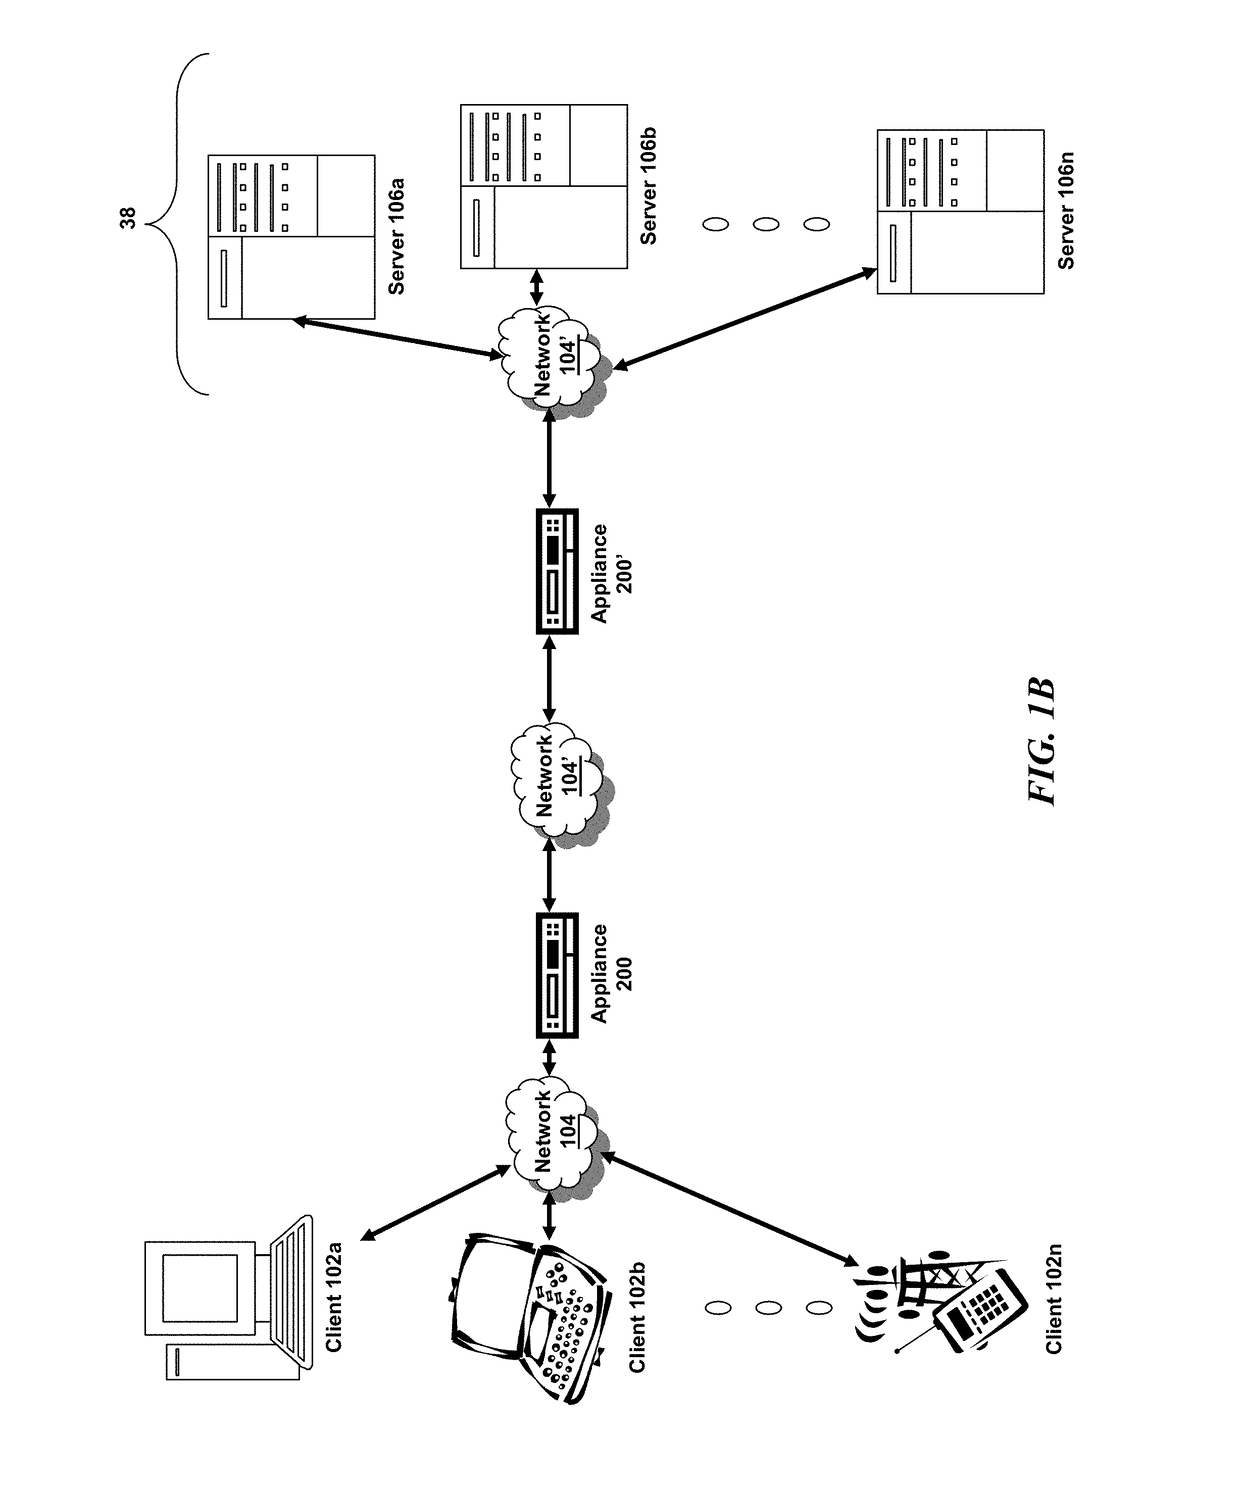 Systems and methods for bridging between public and private clouds through multilevel API integration